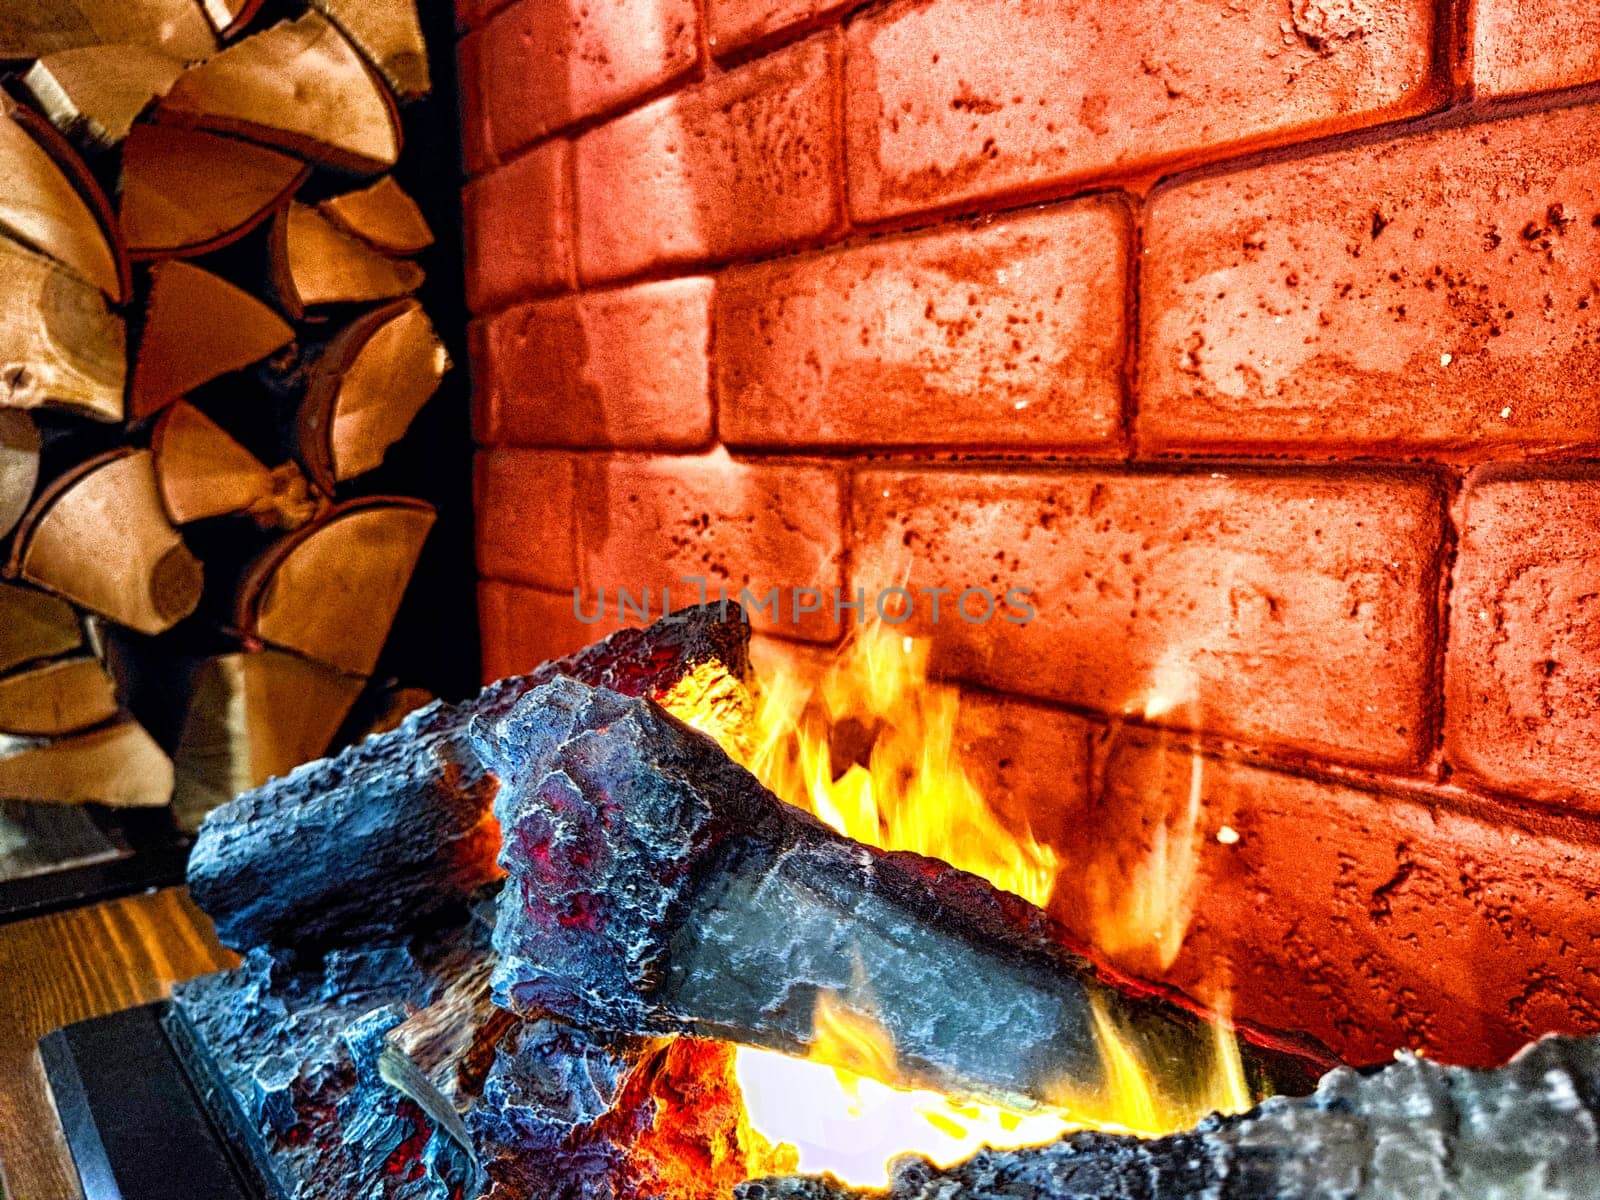 Fireplace. Firebrands, fire and a brick wall on the background. Warm Glow From Firebrands in a Red Brick Fireplace by keleny